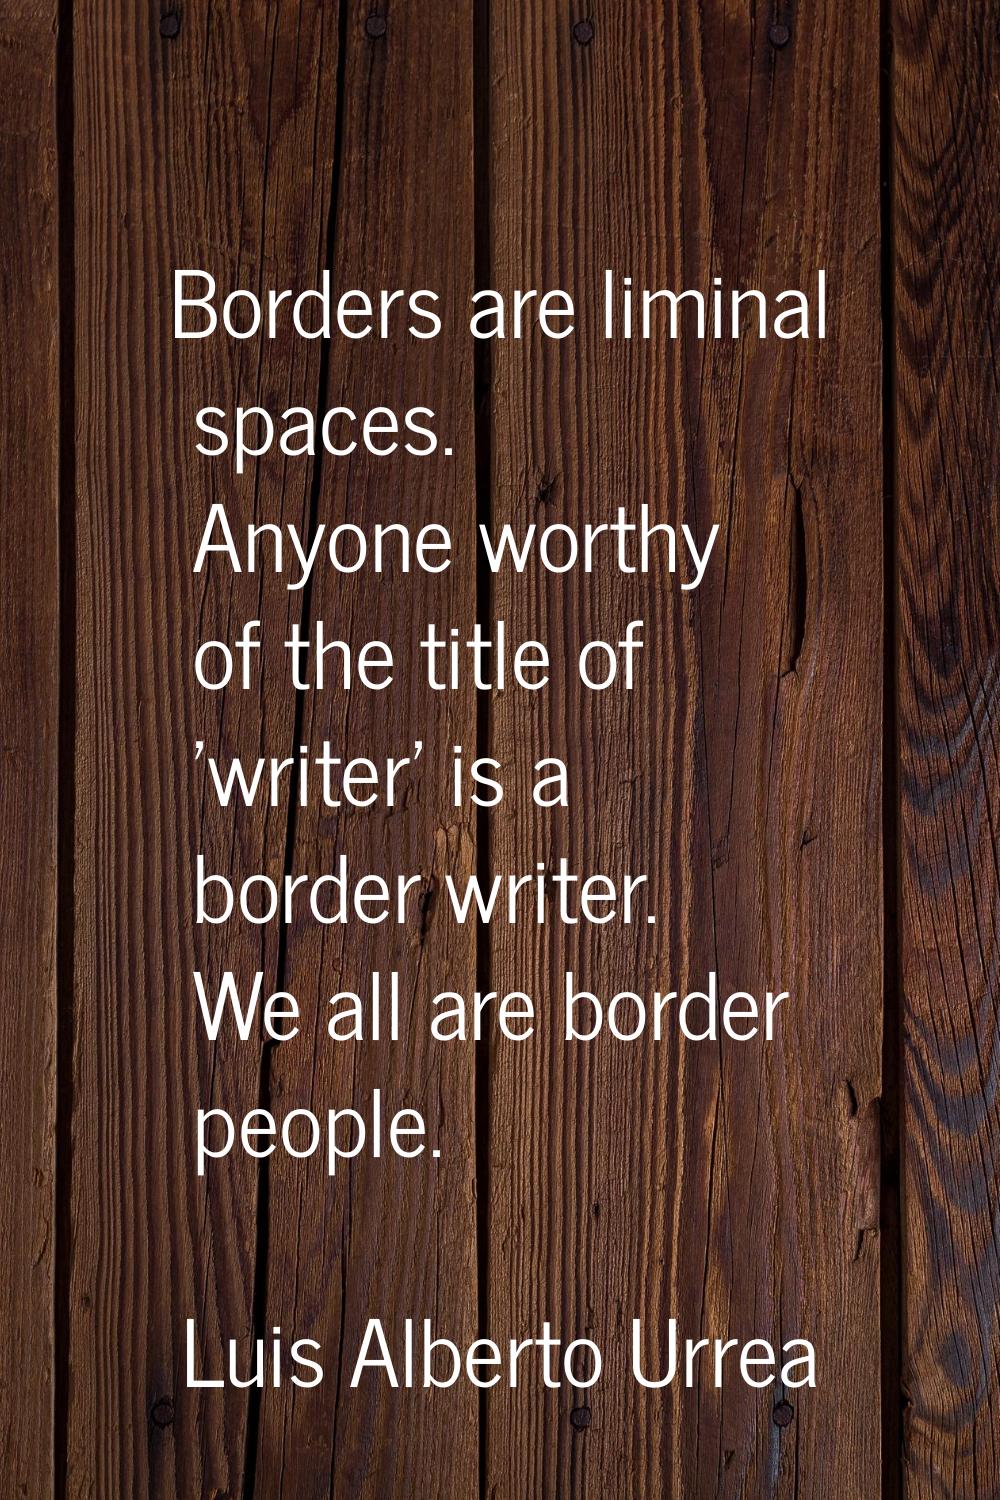 Borders are liminal spaces. Anyone worthy of the title of 'writer' is a border writer. We all are b